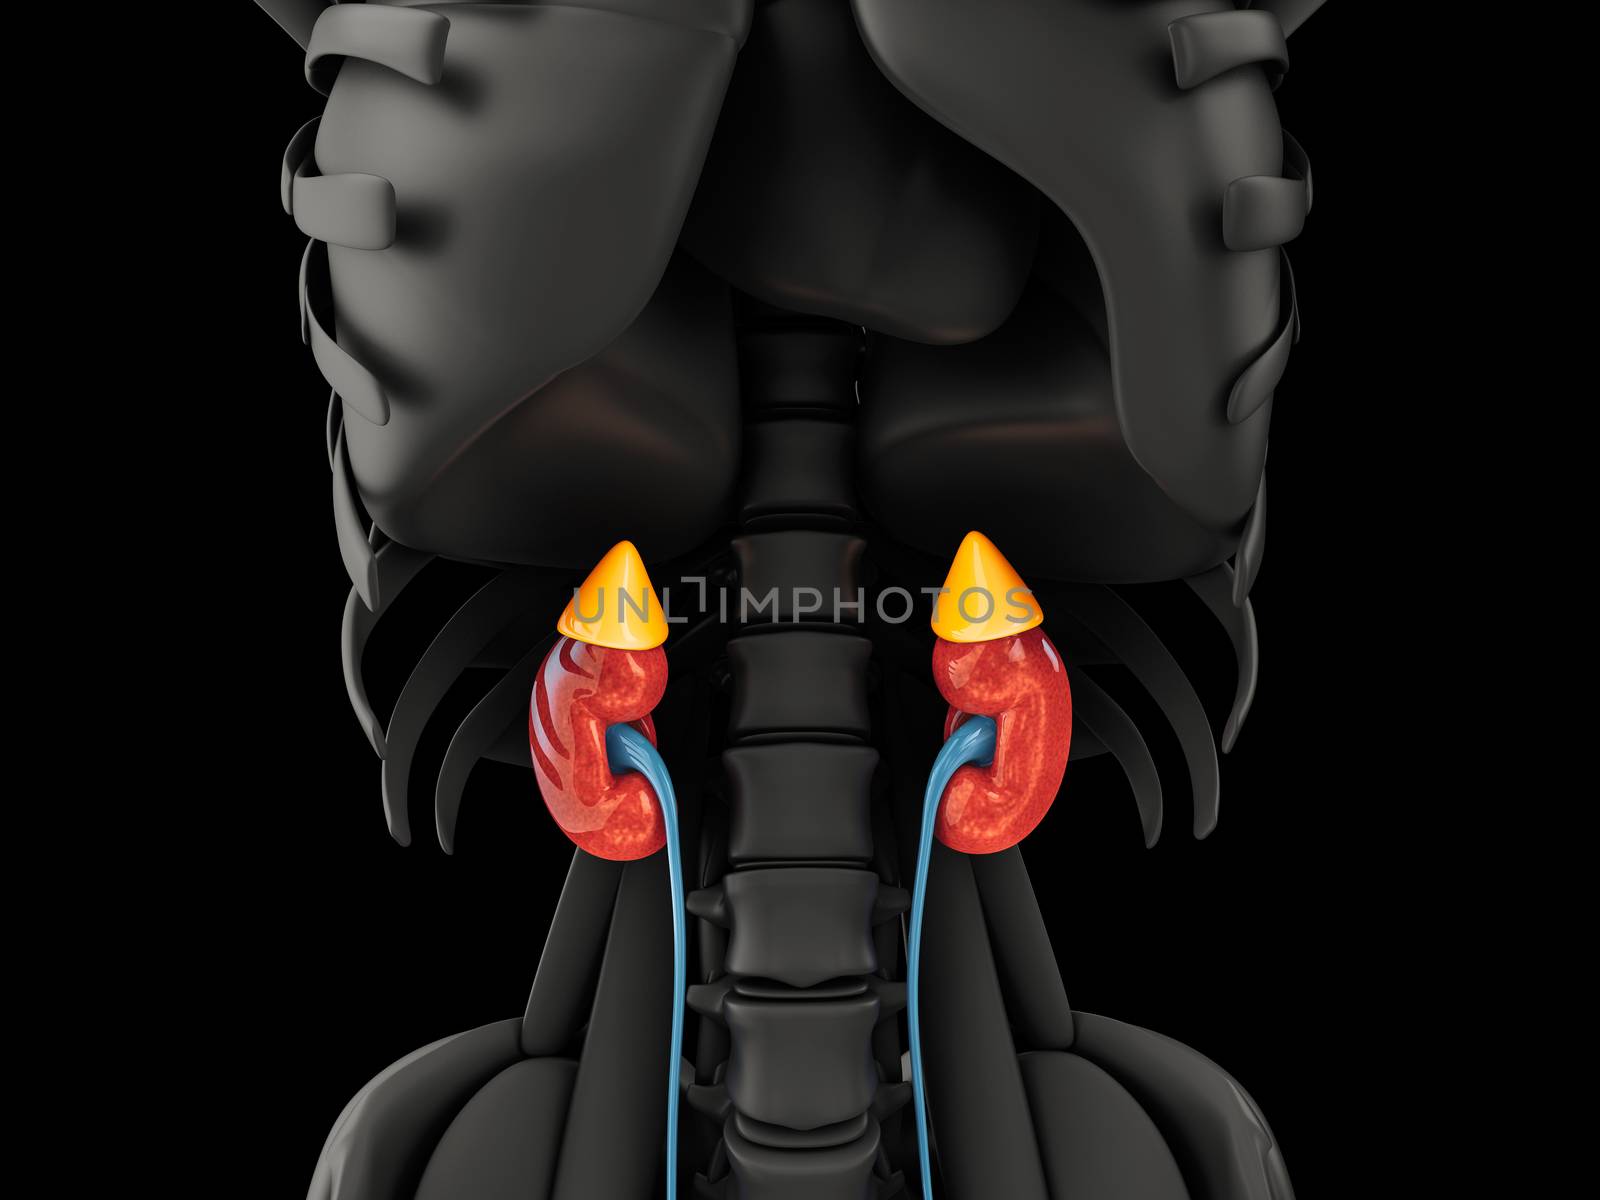 3d illustration of the kidney. Science medical educational material, clipping path included.